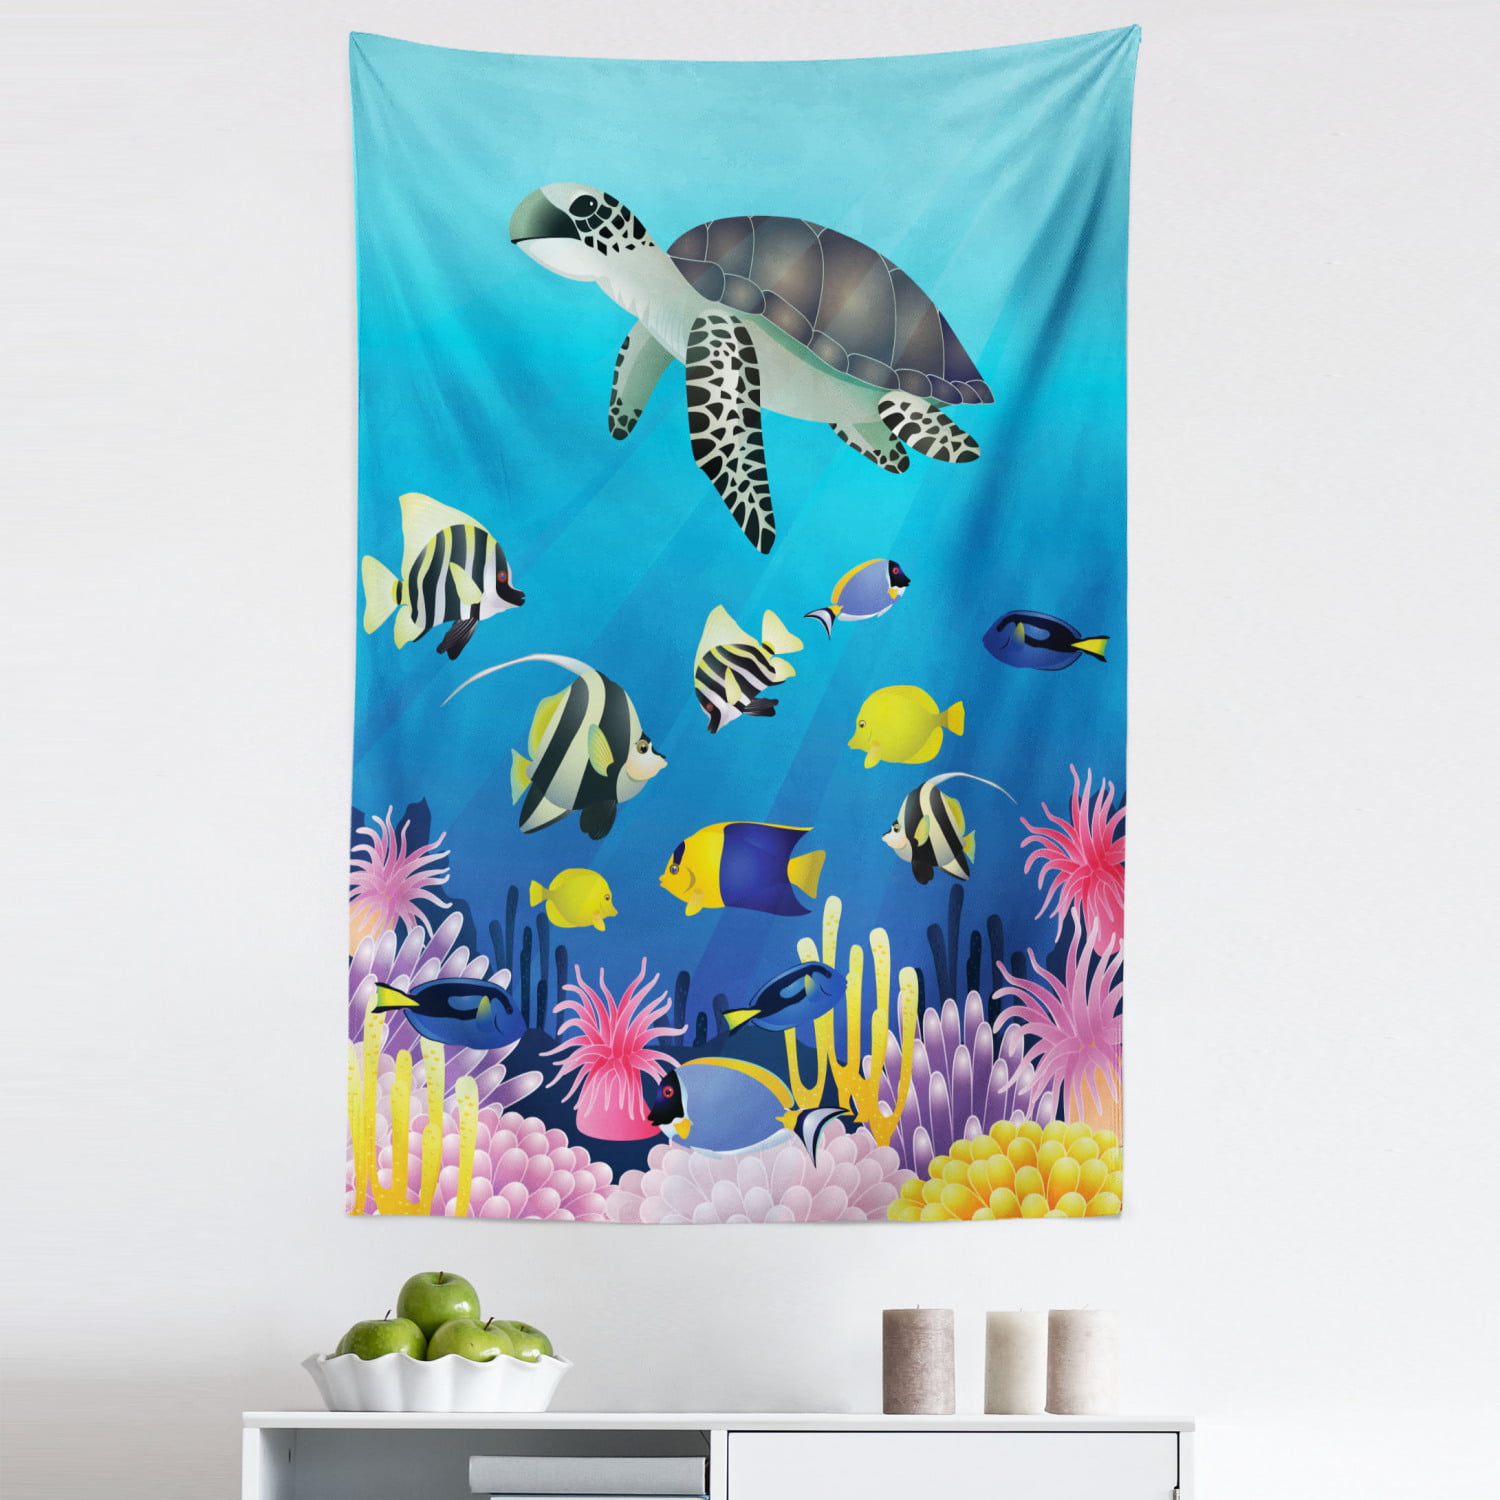 Underwater World Tropical Fish Sea Turtle Tapestry Wall Hanging for Bedroom Dorm